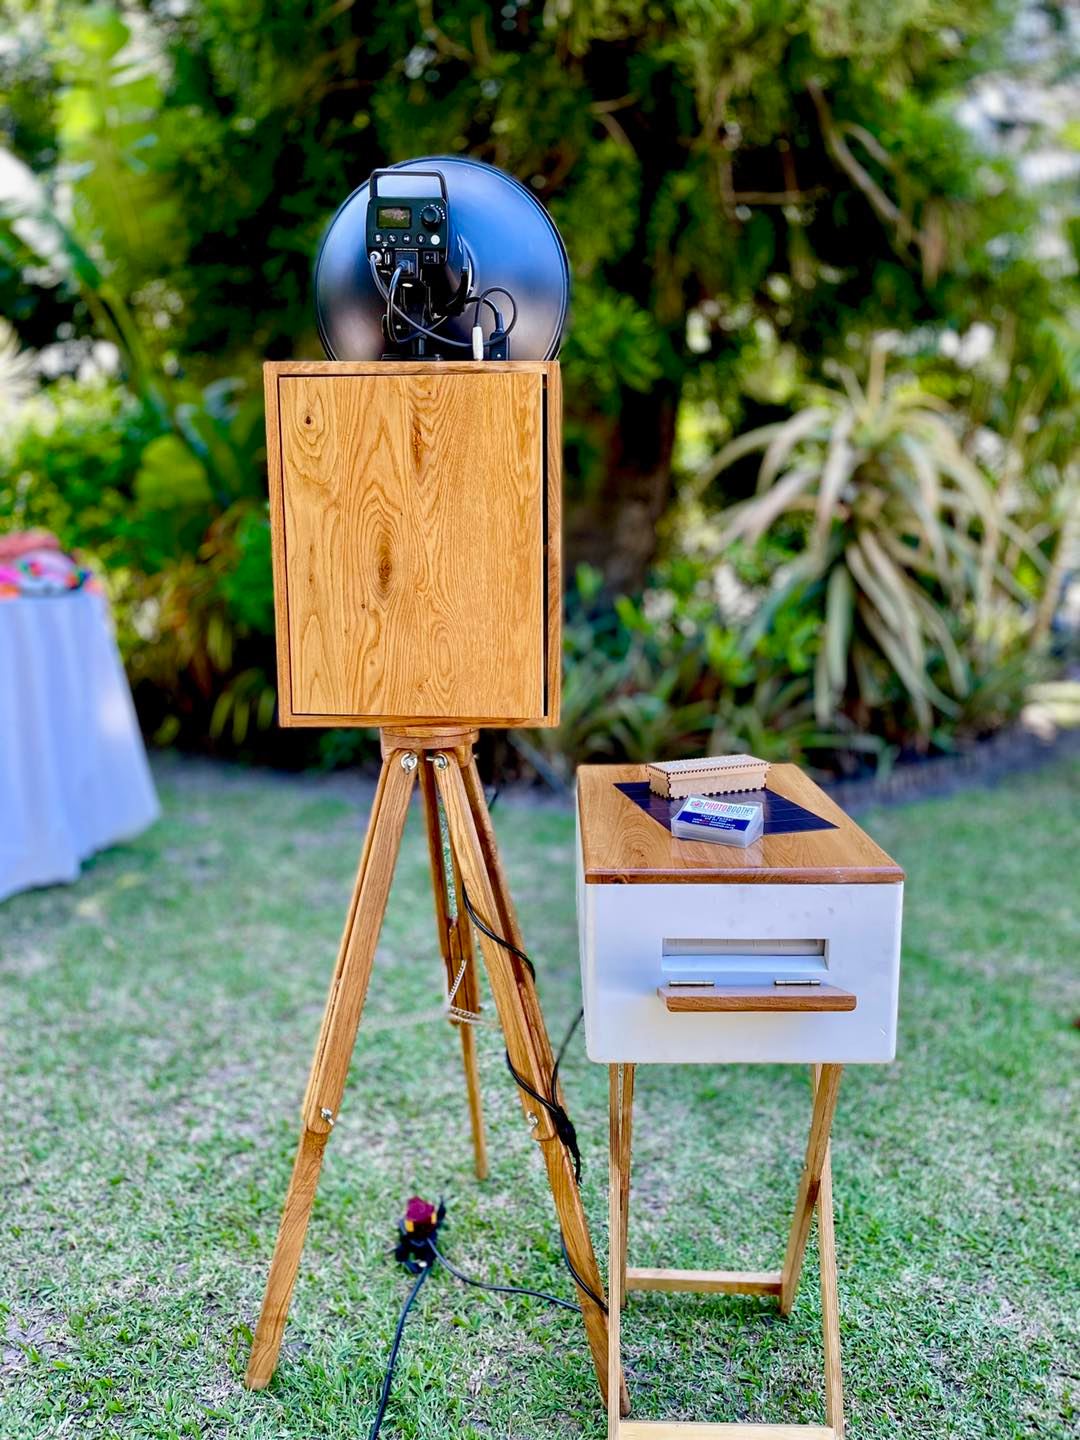 Photobooths For Weddings in KZN - Retro Photobooths with Instant Printing